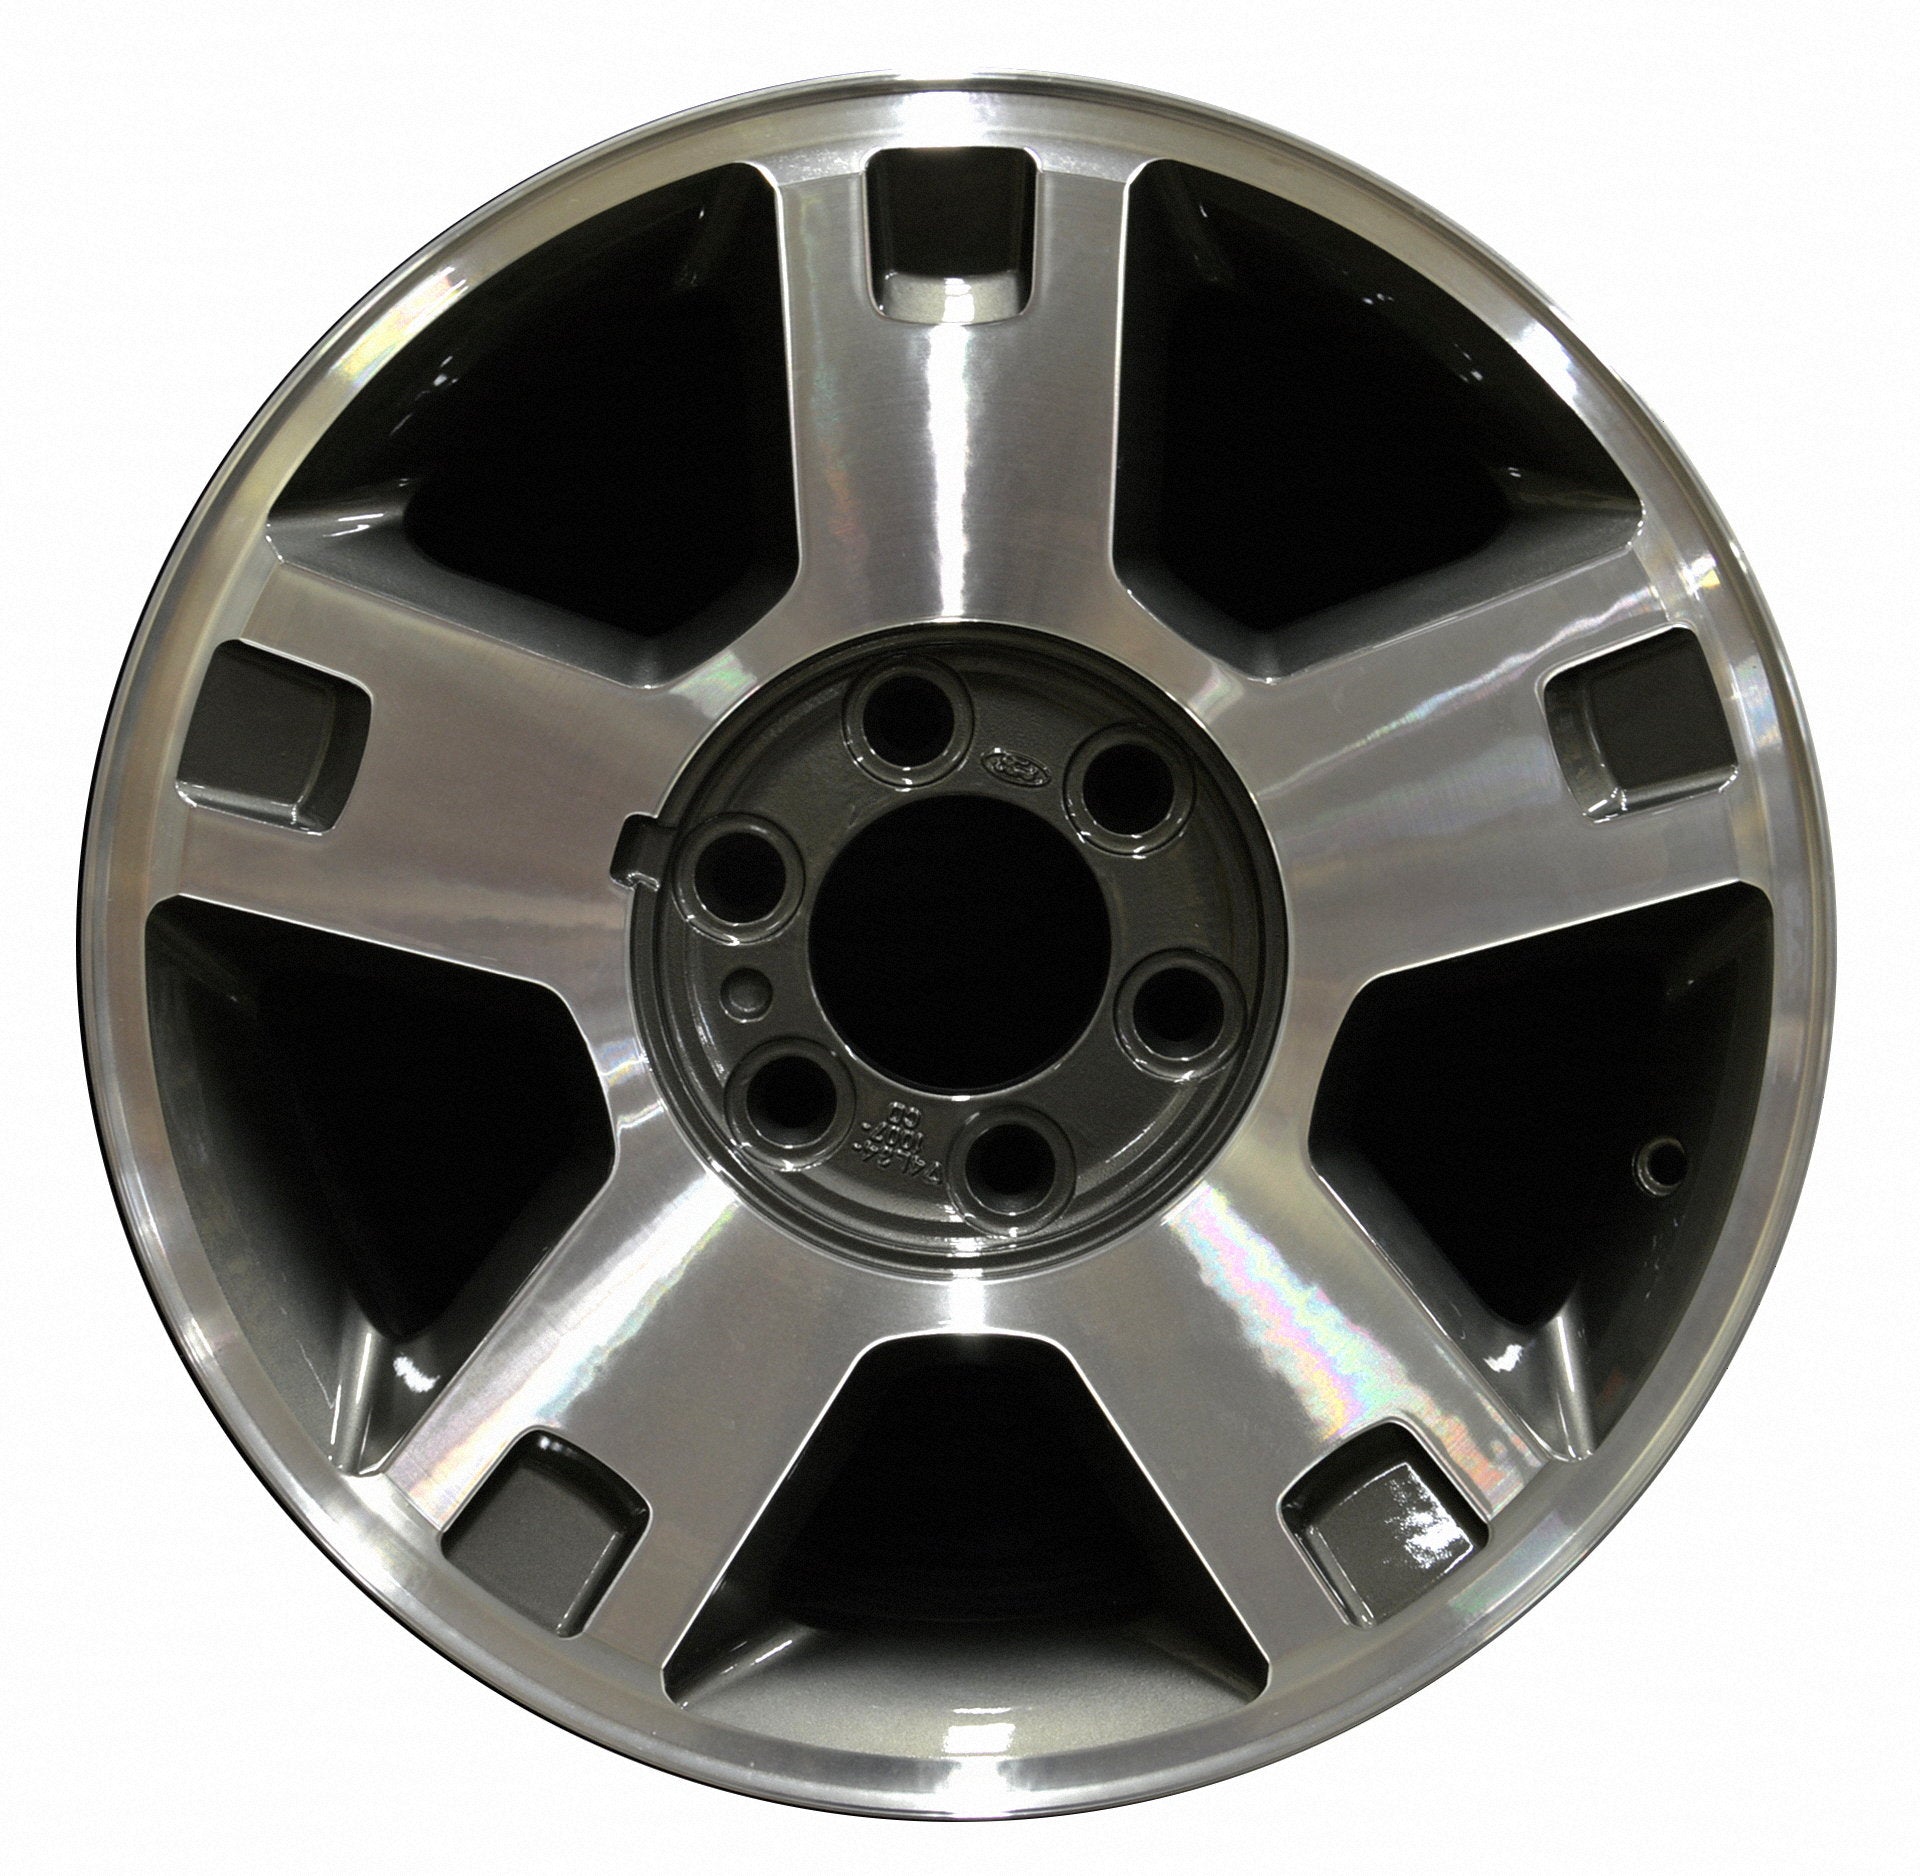 Ford F150 Truck  2004, 2005, 2006, 2007, 2008 Factory OEM Car Wheel Size 18x7.5 Alloy WAO.3560.PC04.MA